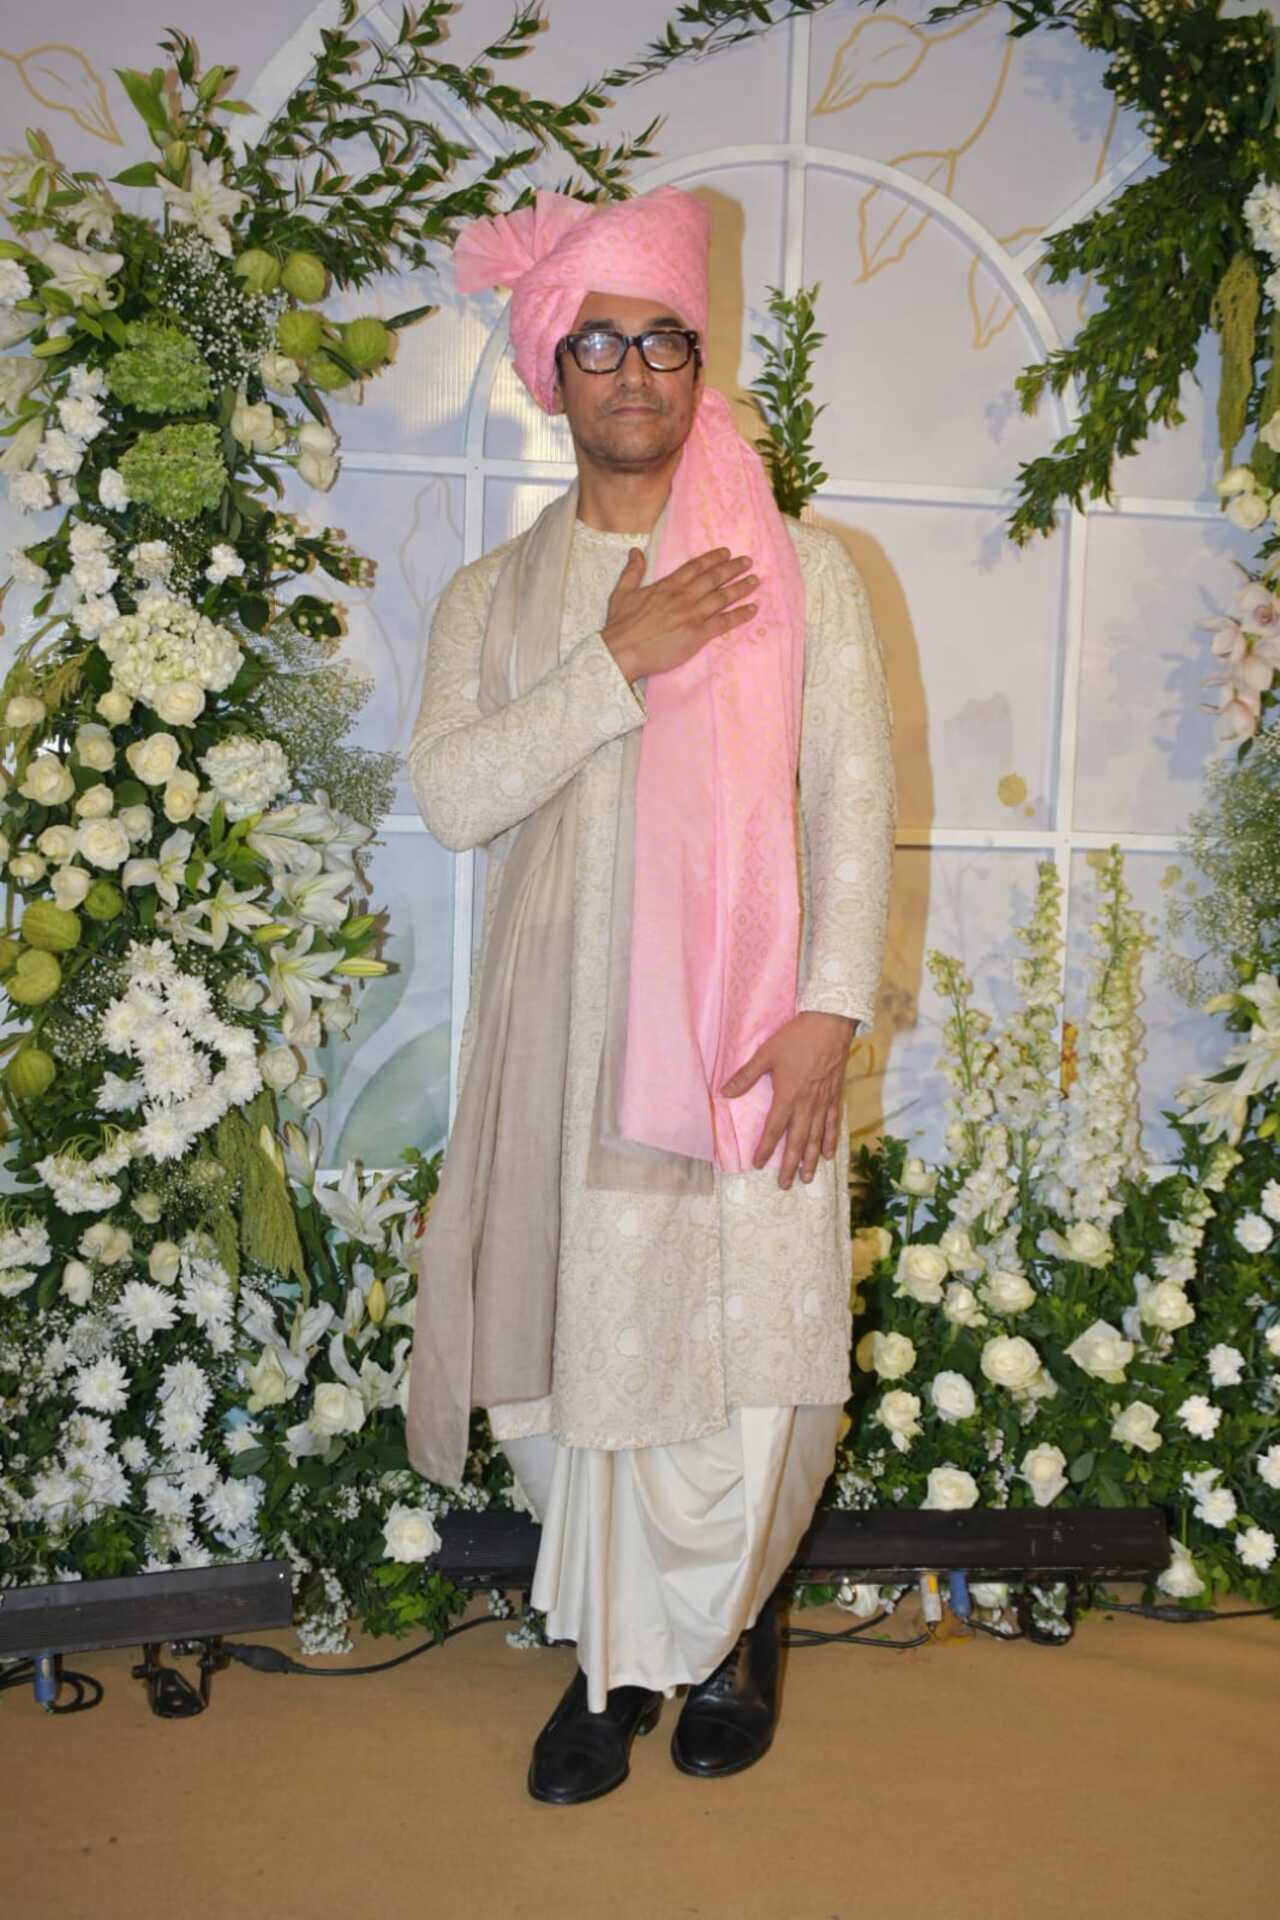 Videos of Aamir dancing at Ira's mehendi and haldi ceremony along with guests and his close family members are doing the rounds on social media. At the wedding, he was following all the duties of the bride's father. From overlooking arrangements to welcoming guests, Aamir was on top of everything for his daughter's big day